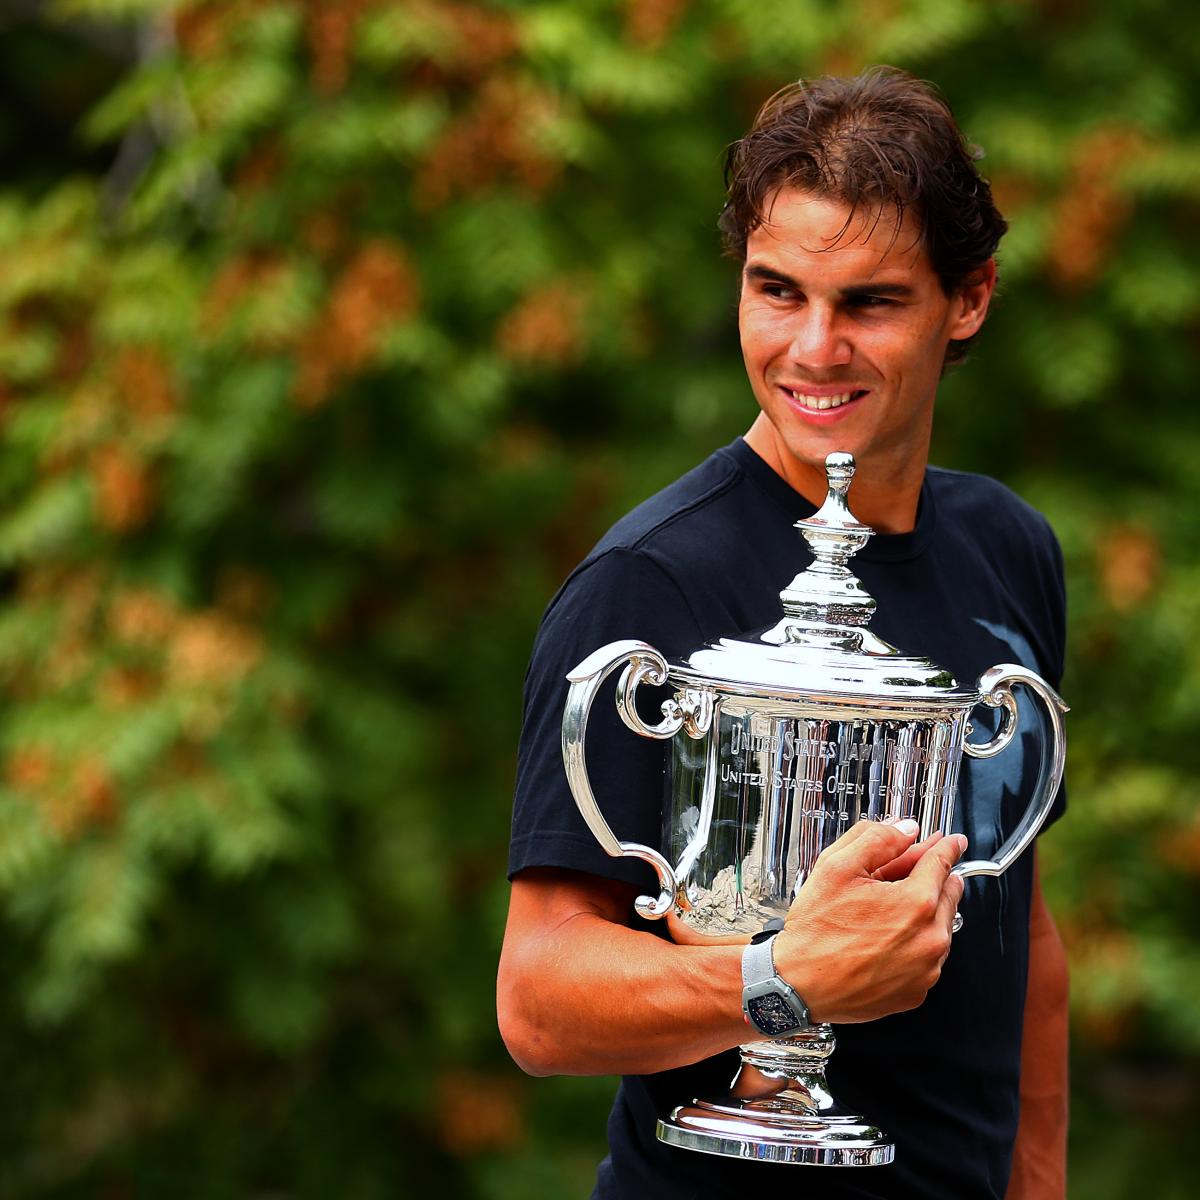 Rafael Nadal's US Open Title Legacy as One of Tennis' Greatest Ever | Bleacher | Latest News, Videos and Highlights